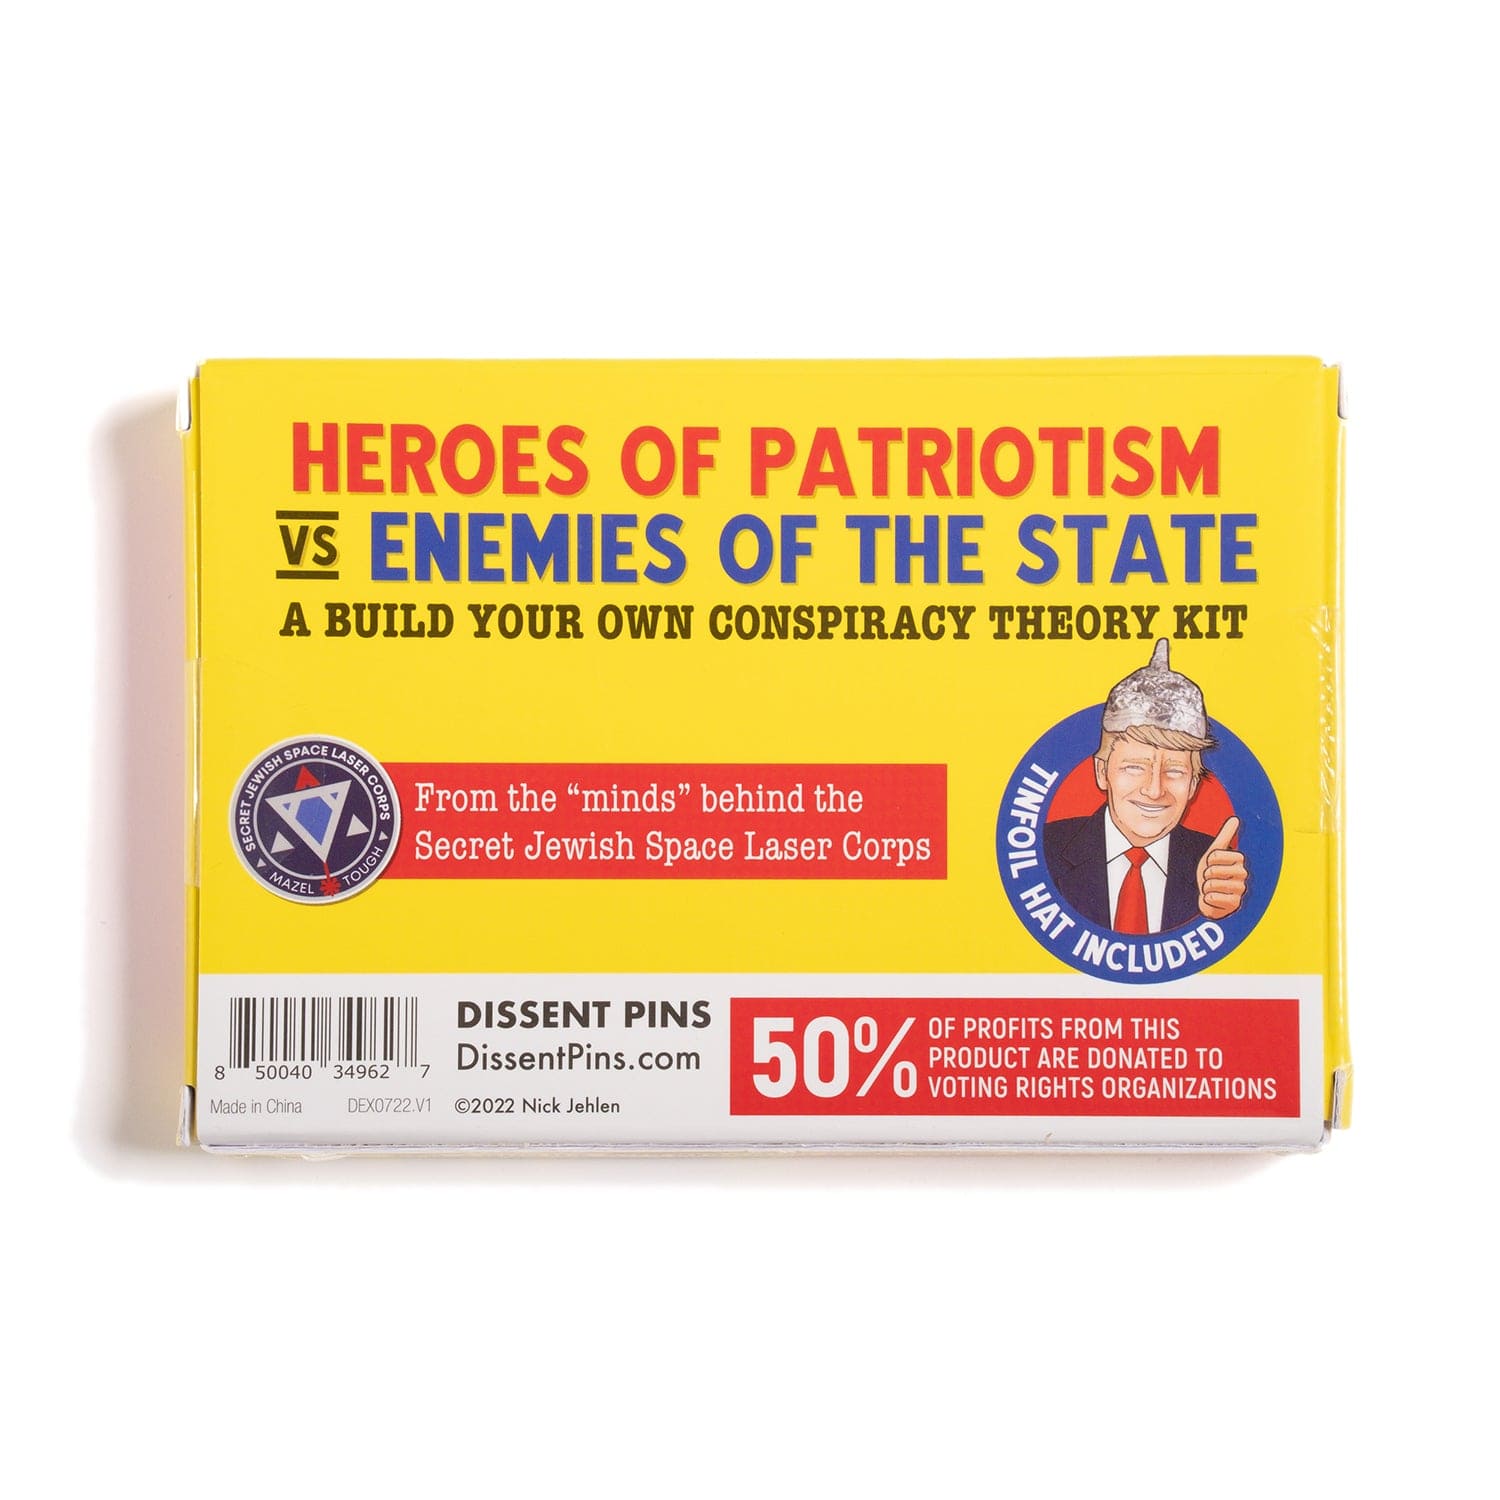 Heroes of Patriotism vs Enemies of the State Conspiracy Theory Kit